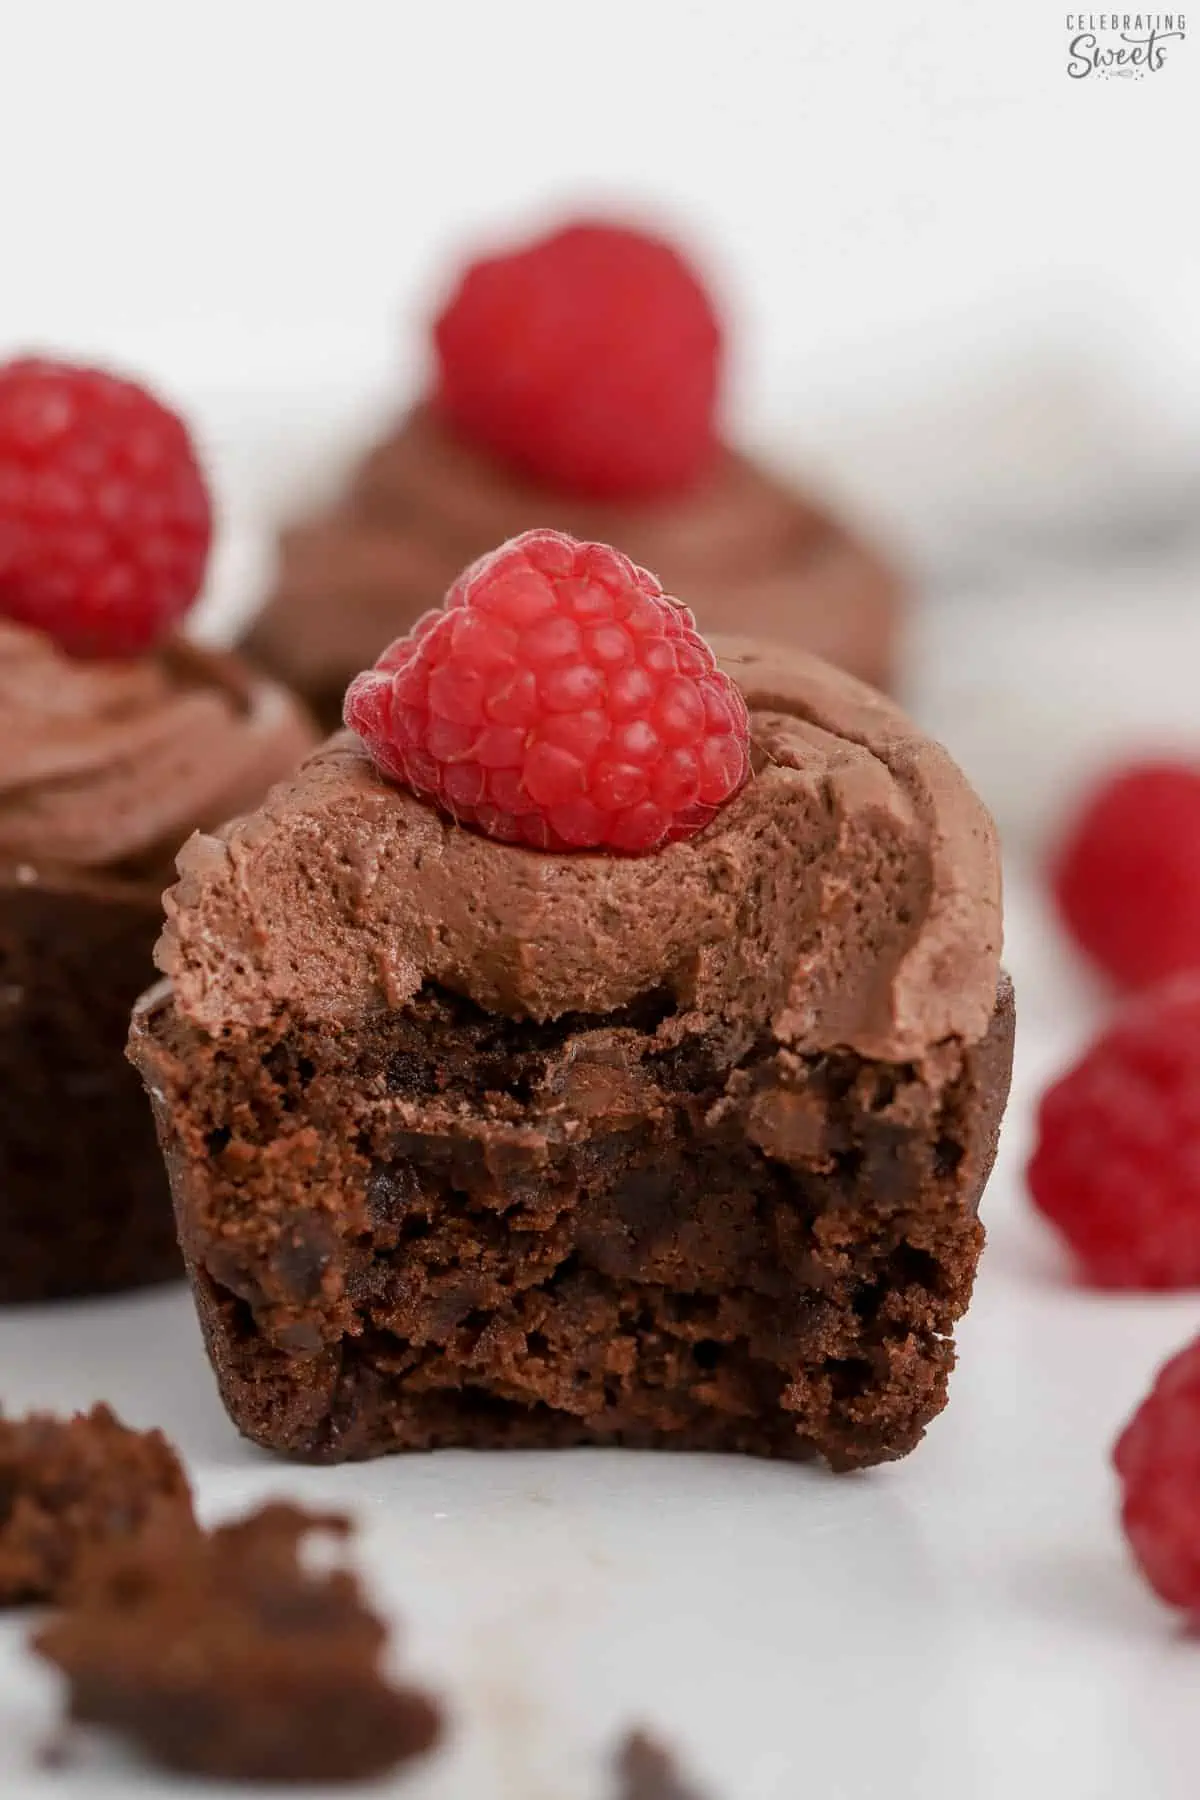 Half of a brownie bite topped with chocolate frosting and a raspberry.